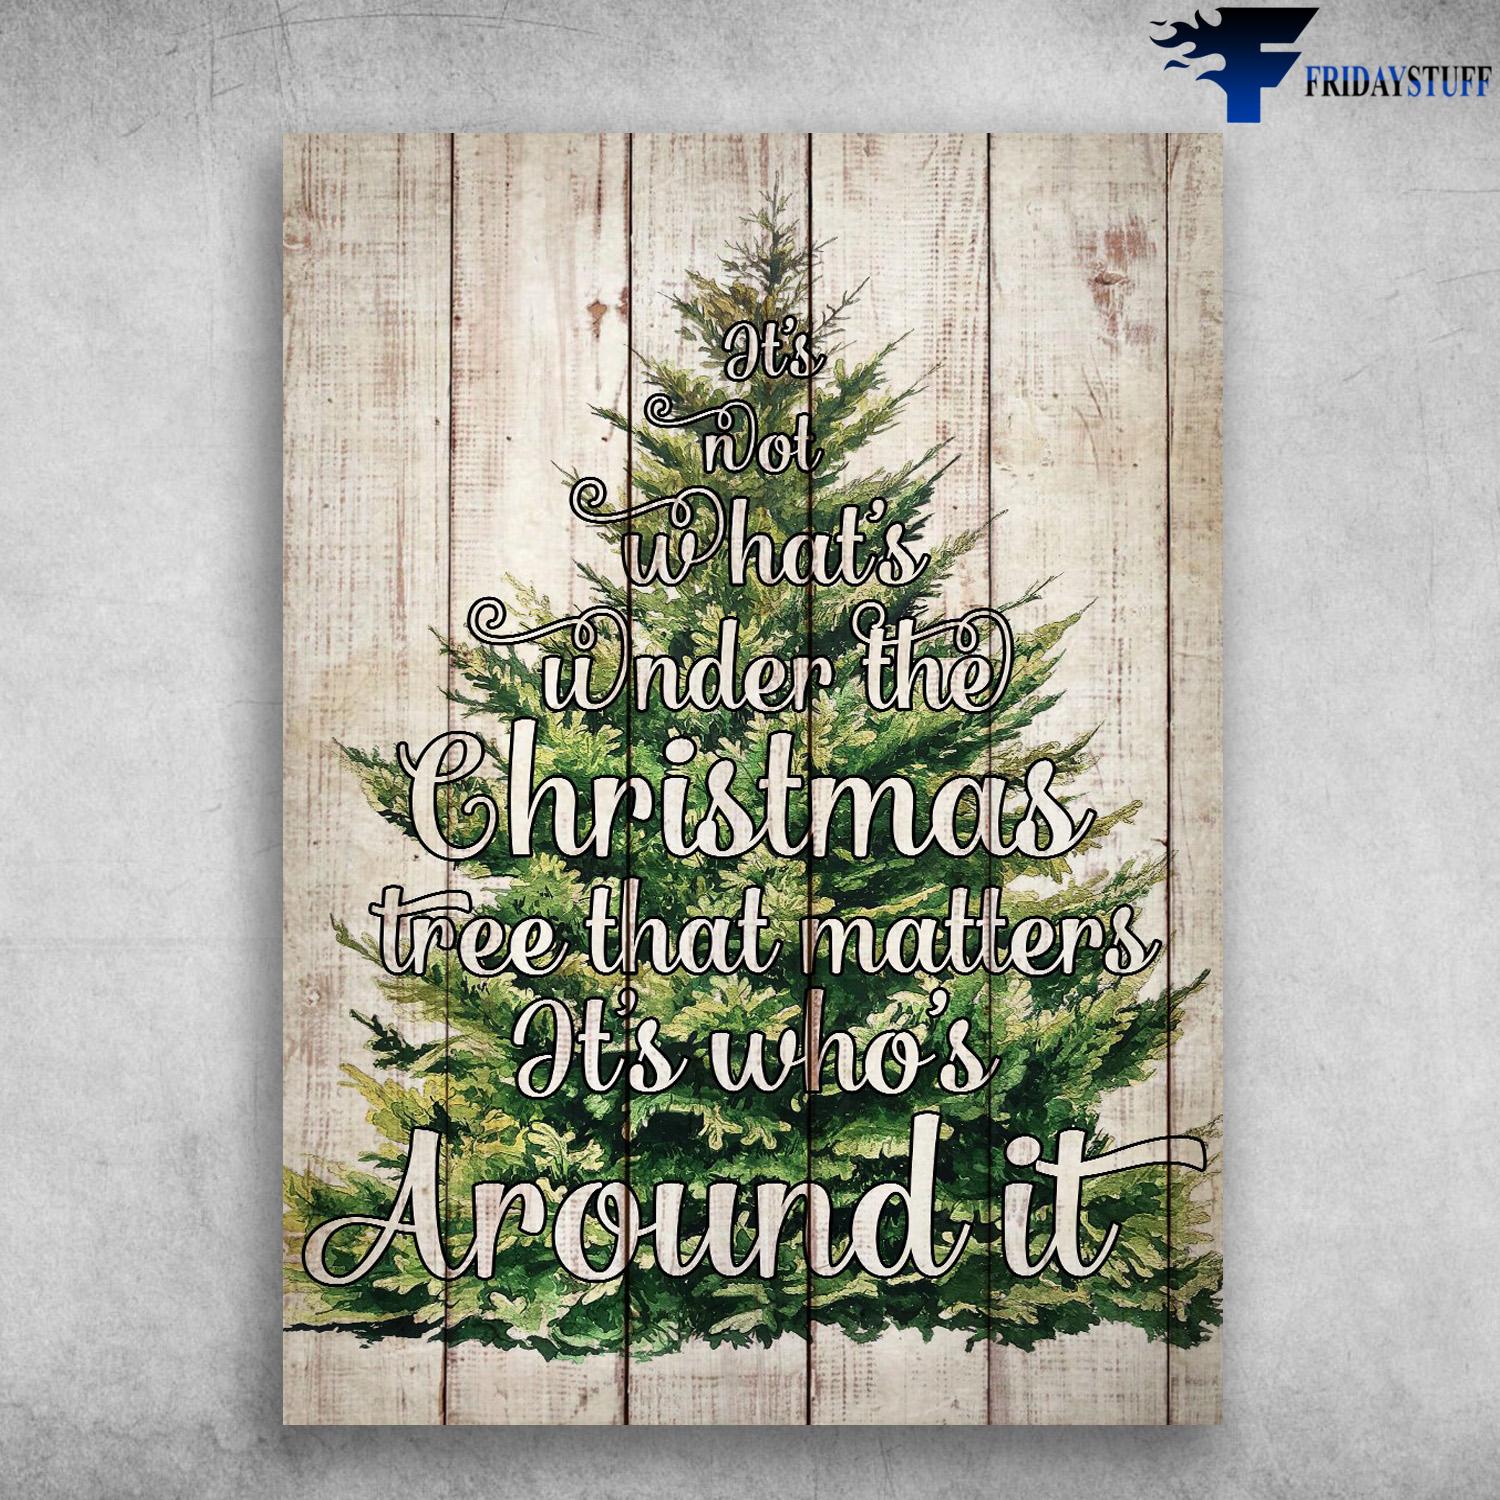 Christmas Tree, Christmas Poster - It's Not What's Under The Christmas Tree That Matters, It's Who's Around It